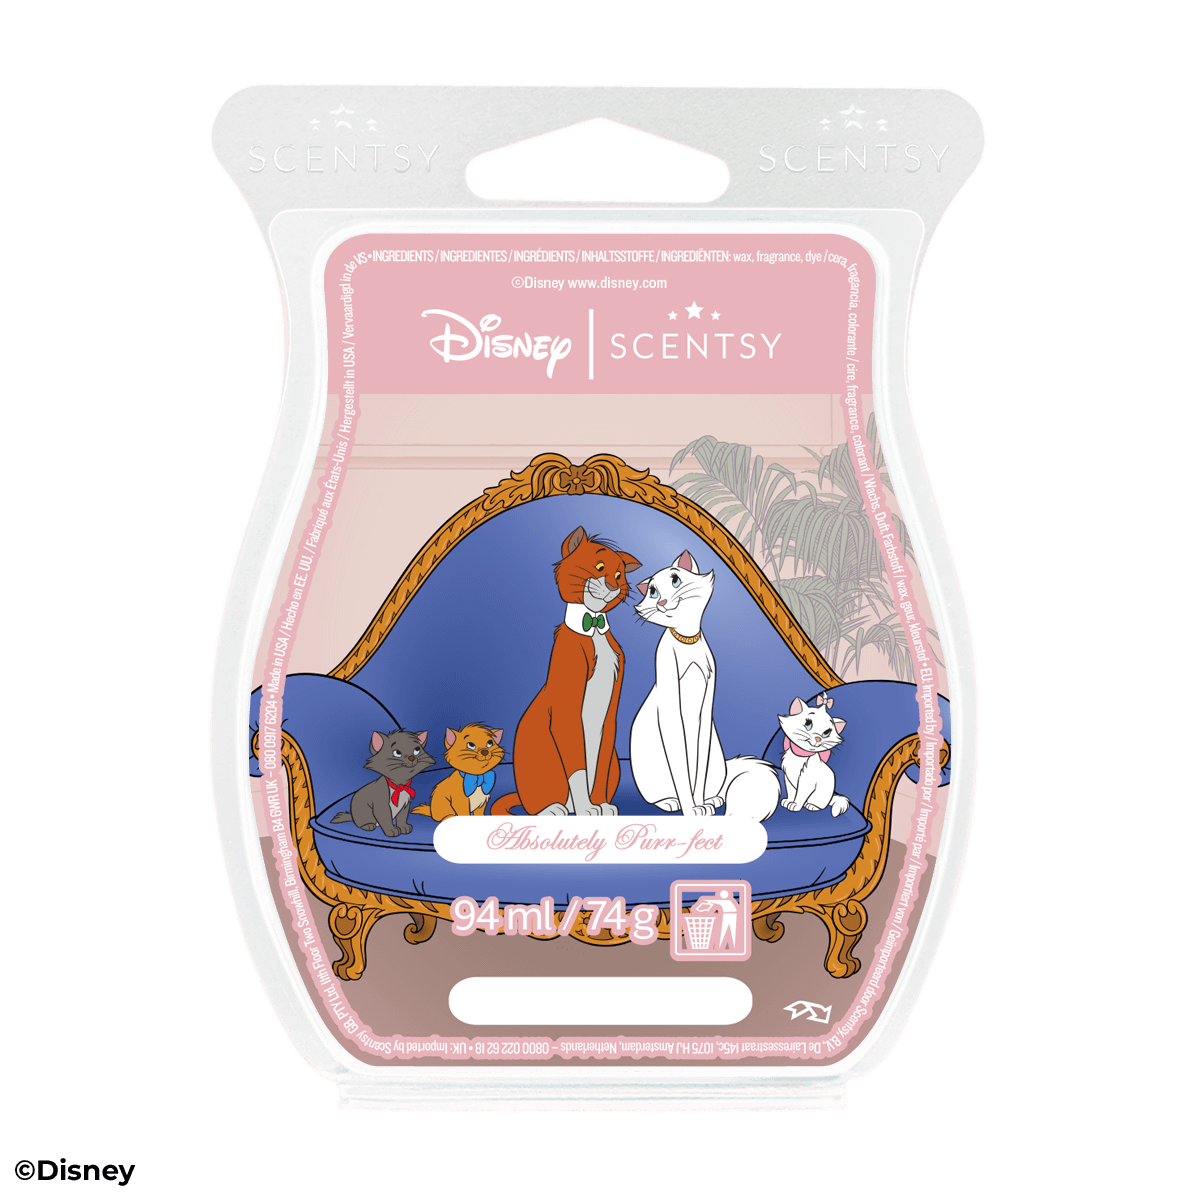 The Aristocats Scentsy Disney Collection, Marie Warmer